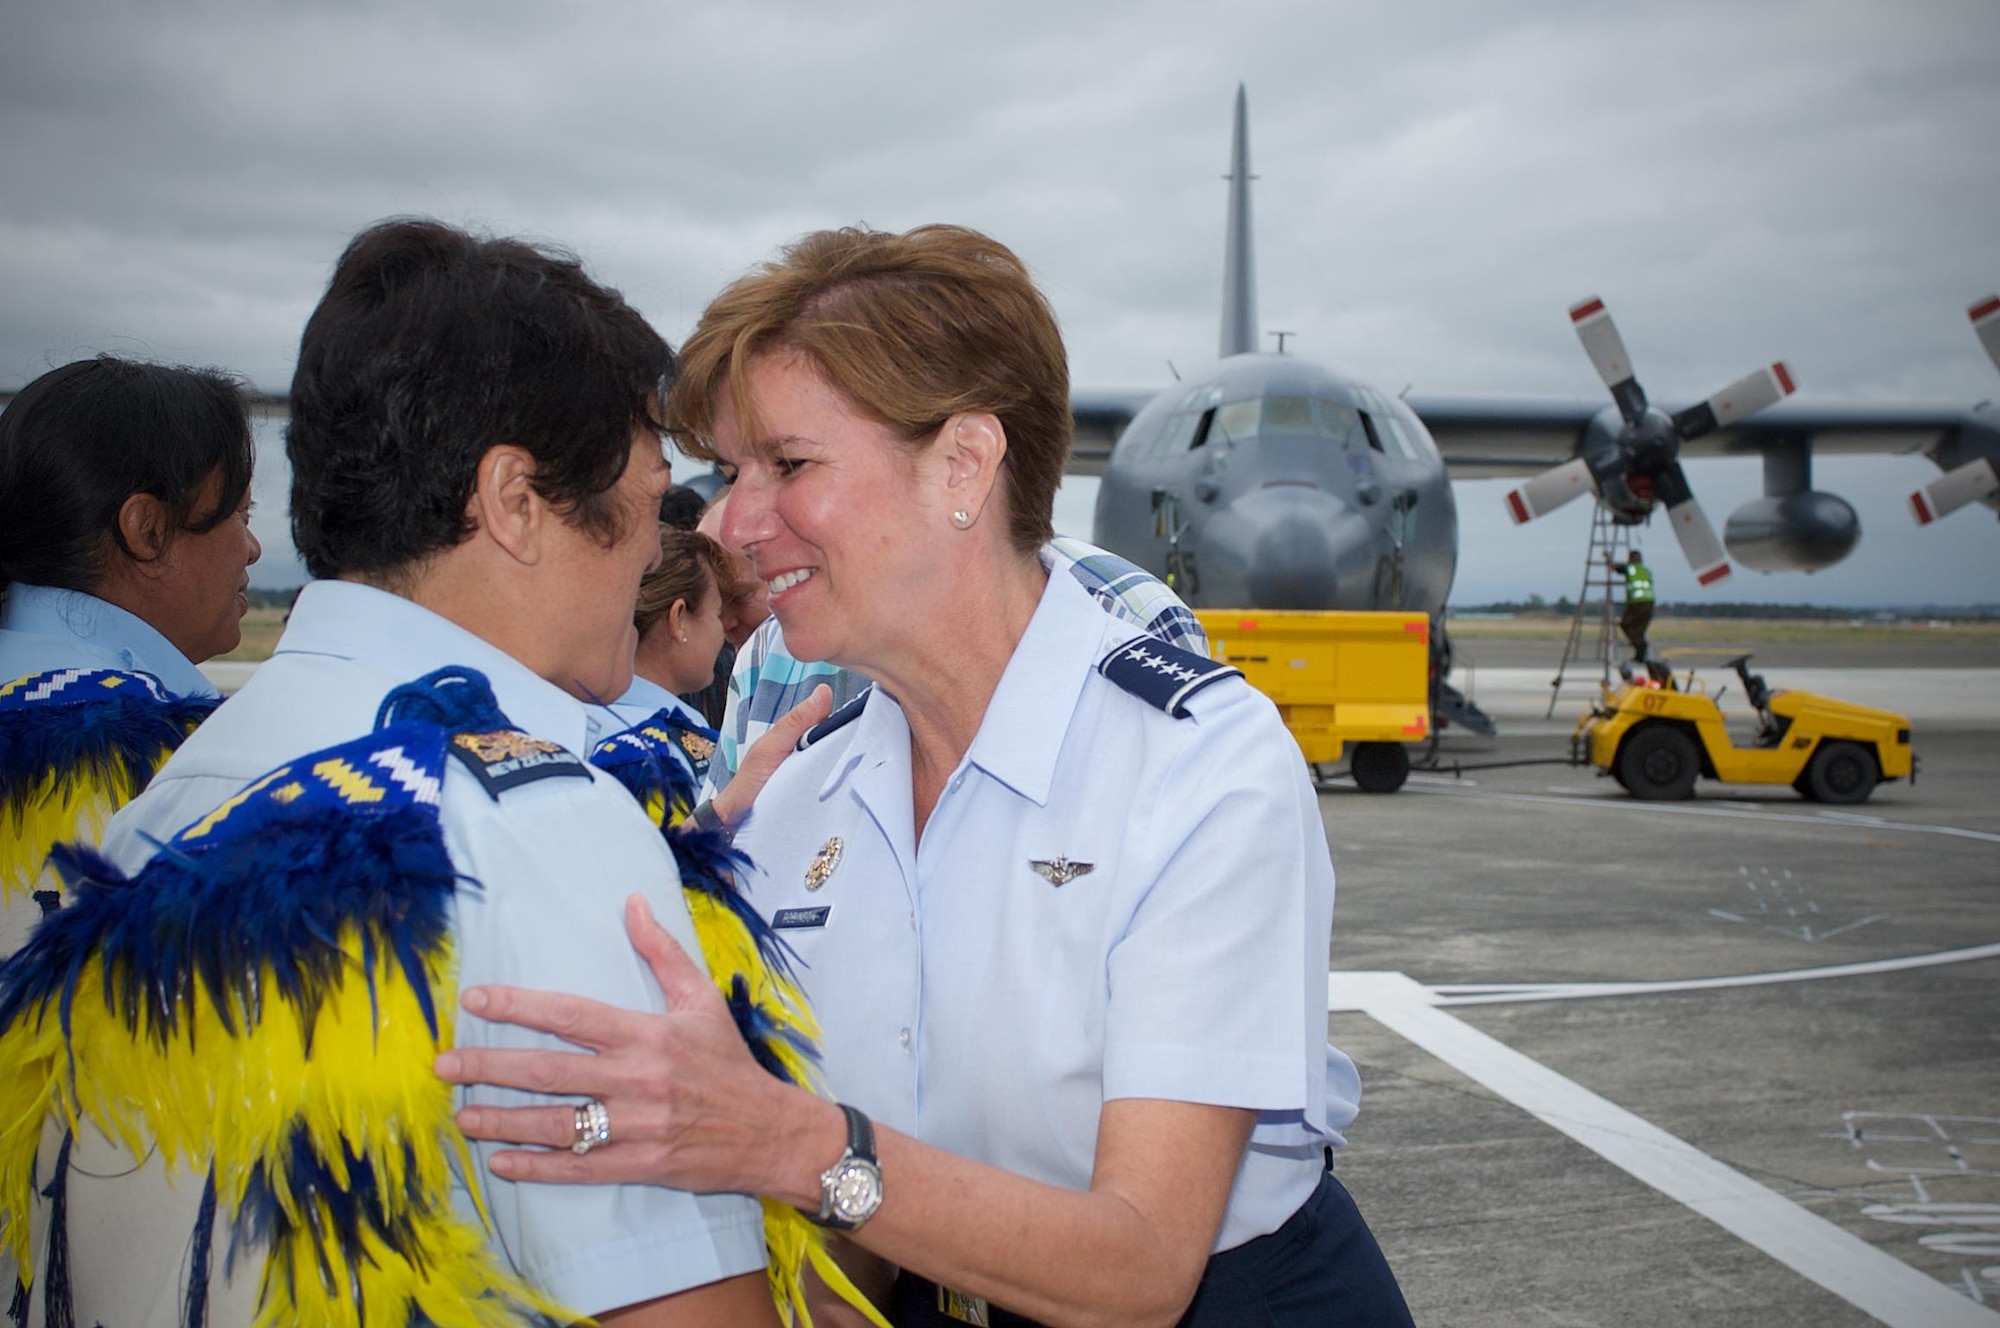 Gen. Lori Robinson, Pacific Air Forces commander, performs a traditional hongi greeting with Royal New Zealand Air Force service members upon her arrival at RNZAF Base Ohakea, New Zealand, March 4, 2016, where she gave remarks at the 75 Years of Women in Service celebration. The visit to RNZAF Base Ohakea was part of Robinson’s two-week visit to New Zealand and Australia, which served to improve relations with both nations and reaffirmed PACAF’s commitment to the rebalance in the Pacific. (Photo courtesy of RNZAF)